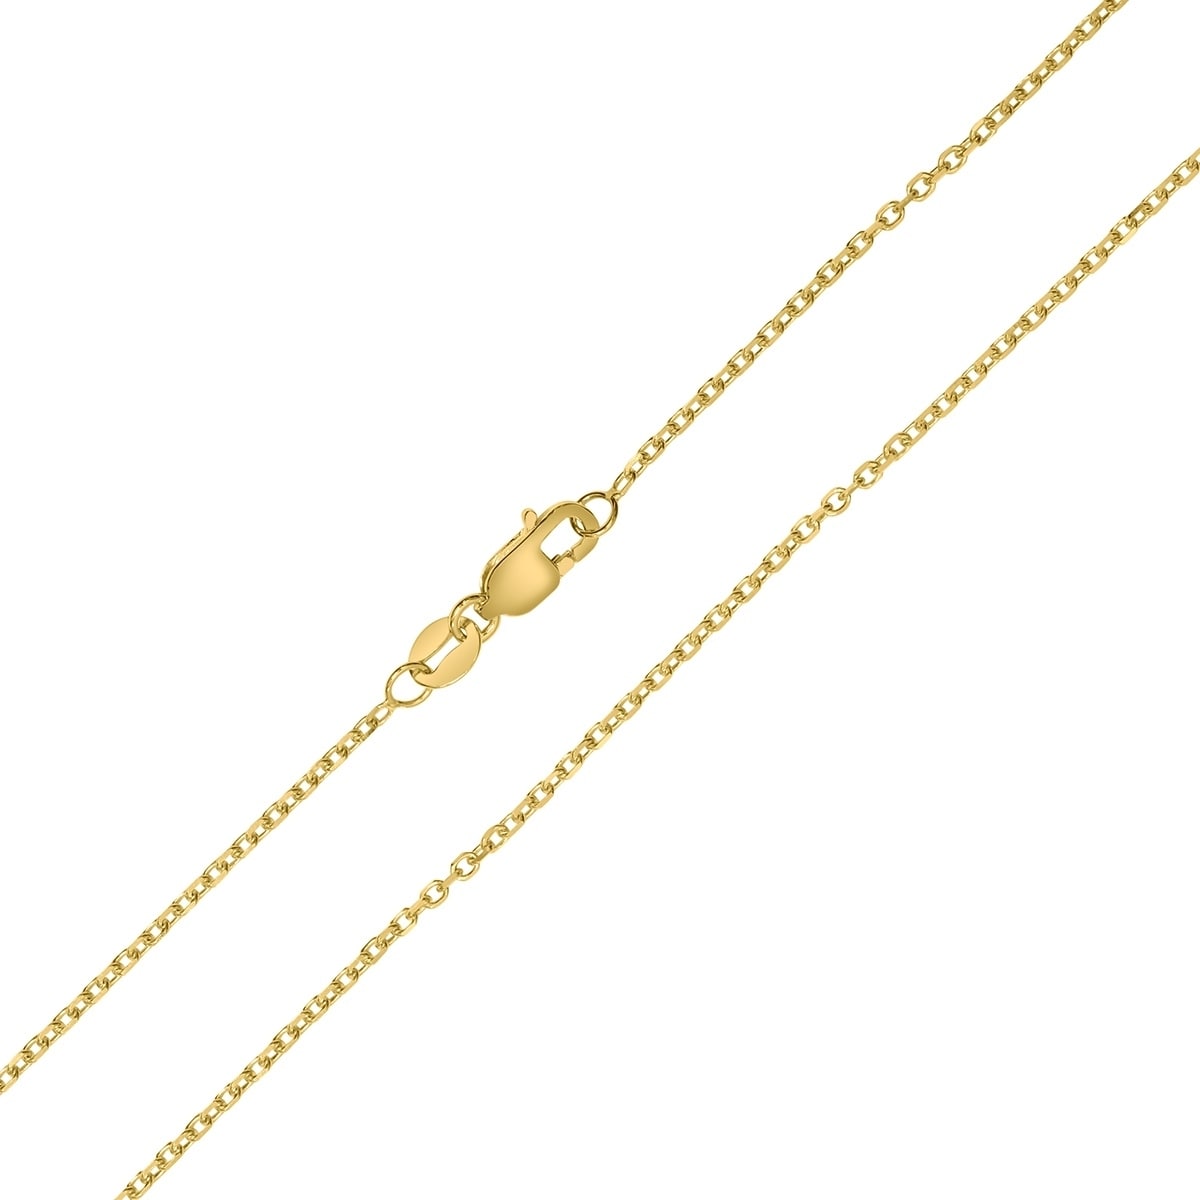 Jewel Tie 14k Yellow Gold 1 mm Diamond-Cut Cable Chain Necklace with Secure Lobster Lock Clasp